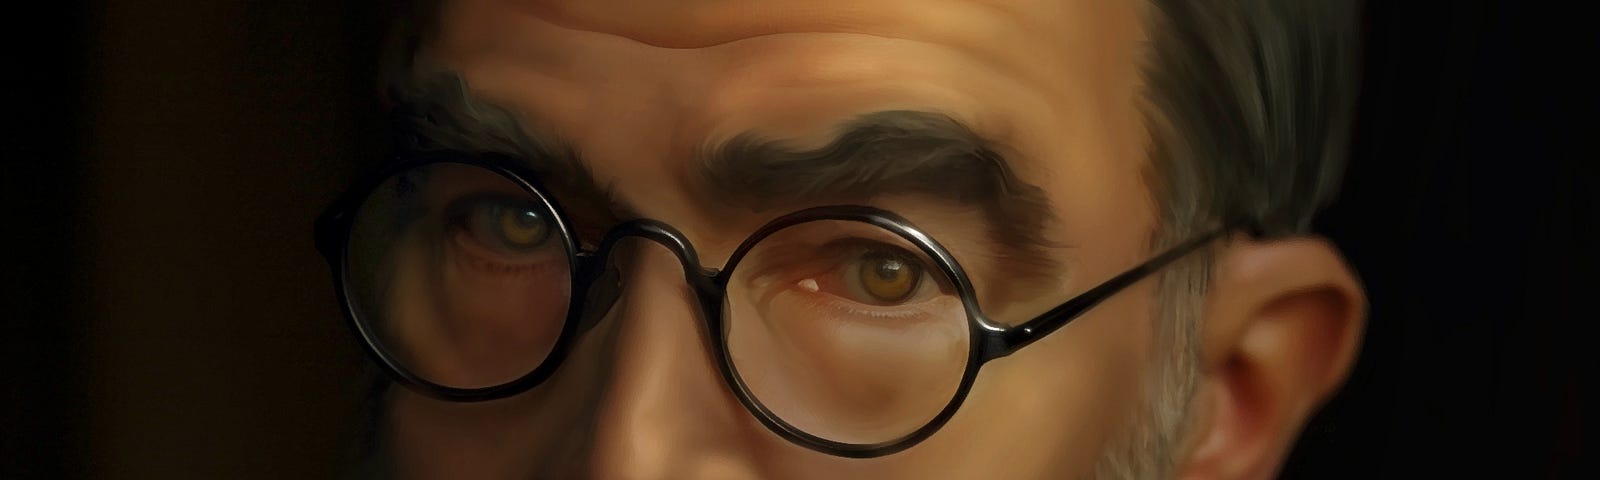 Digital painting of a portrait of Dr. Victor Stahl, a mature white man with a distinctive pointed white beard, brown hair, and round black-rimmed spectacles.